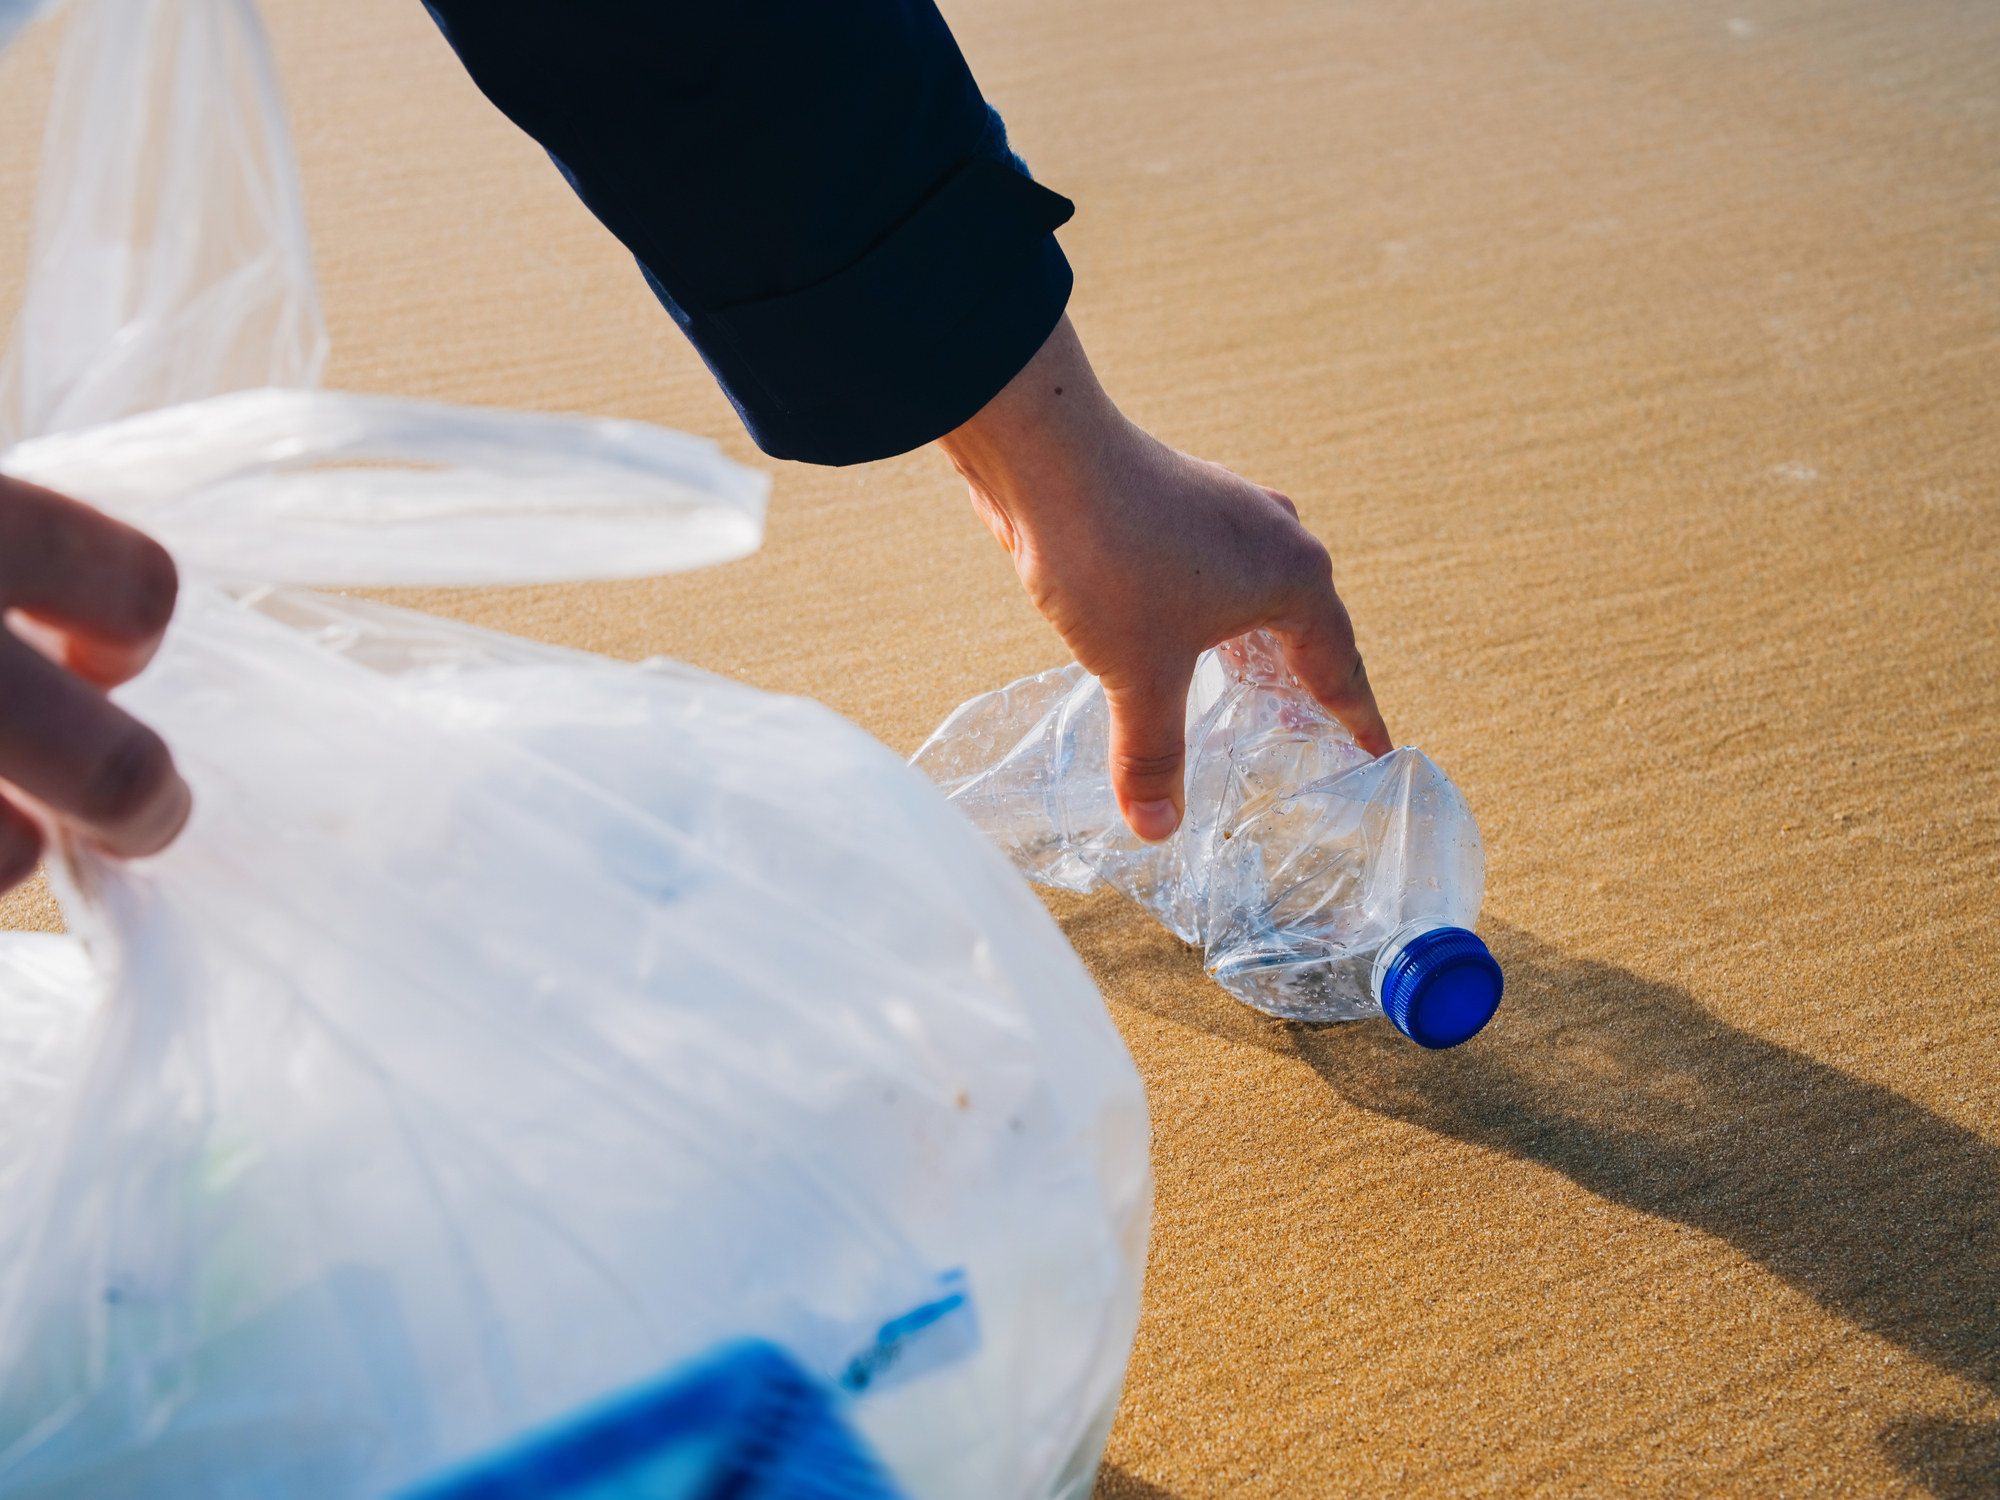 Hand picking up plastic bottle at beach.